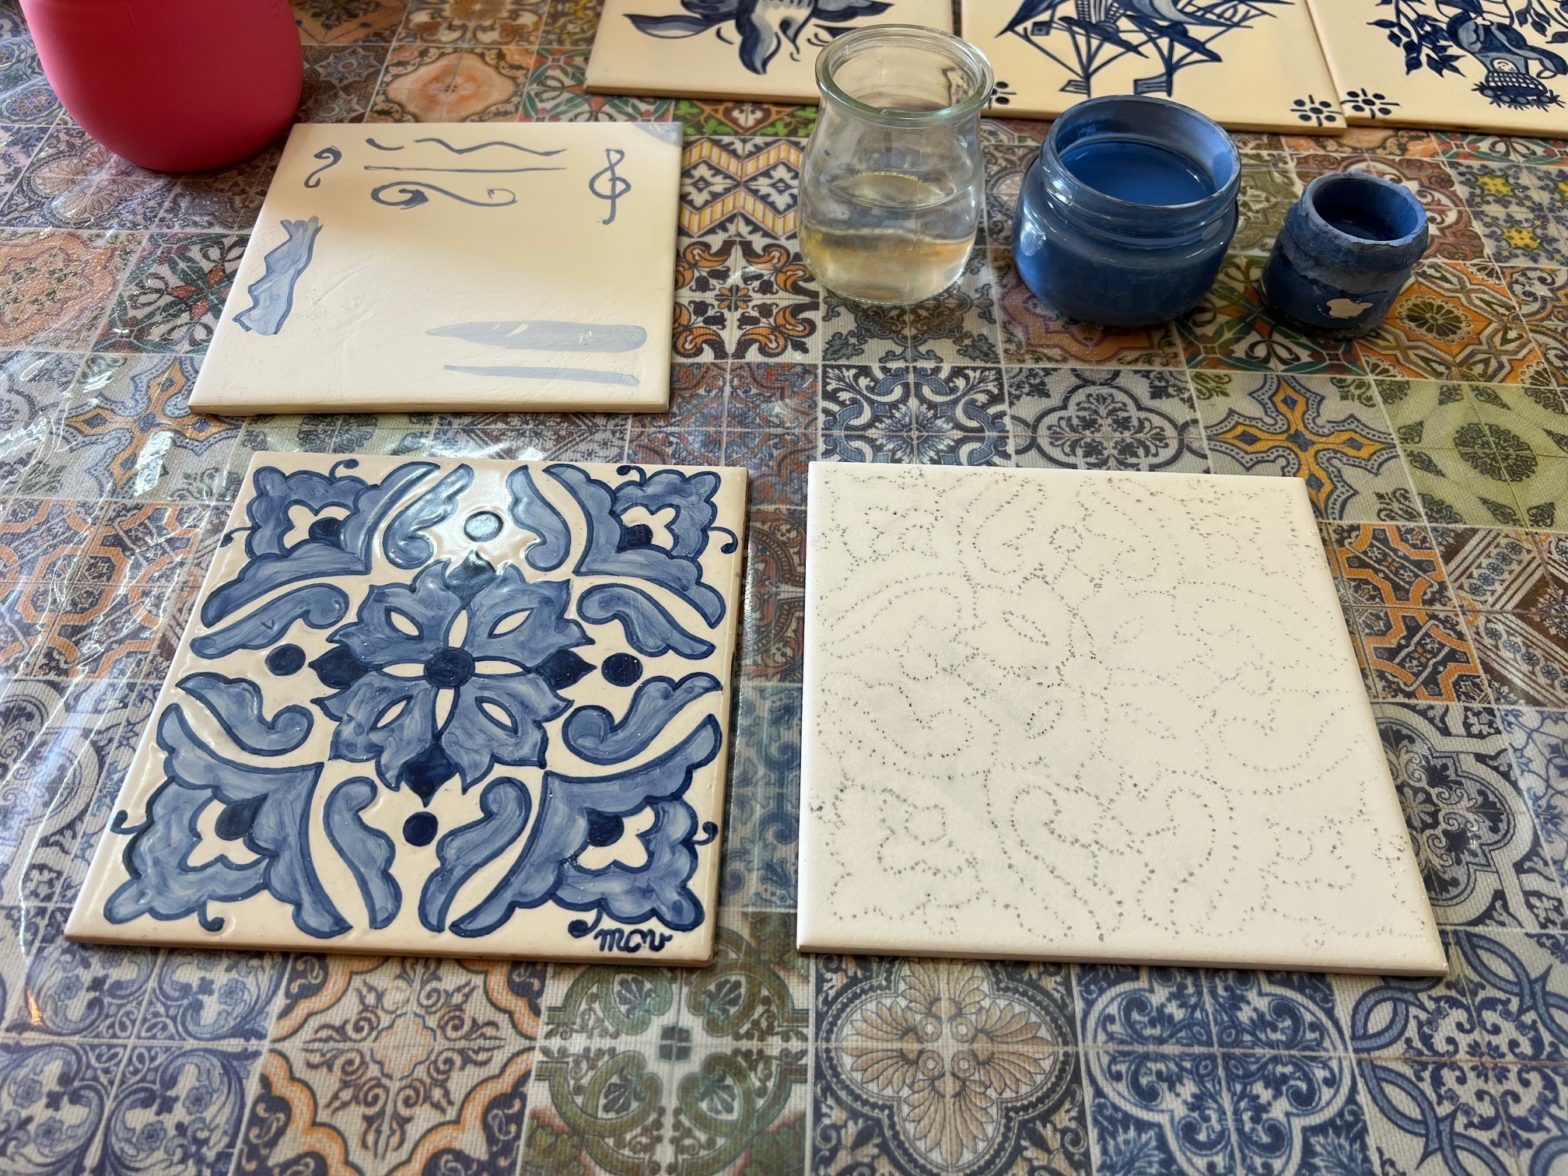 Three ceramic tiles at various stages of design completion on a colourful tabletop. In the background are two small paint pots and a water jar